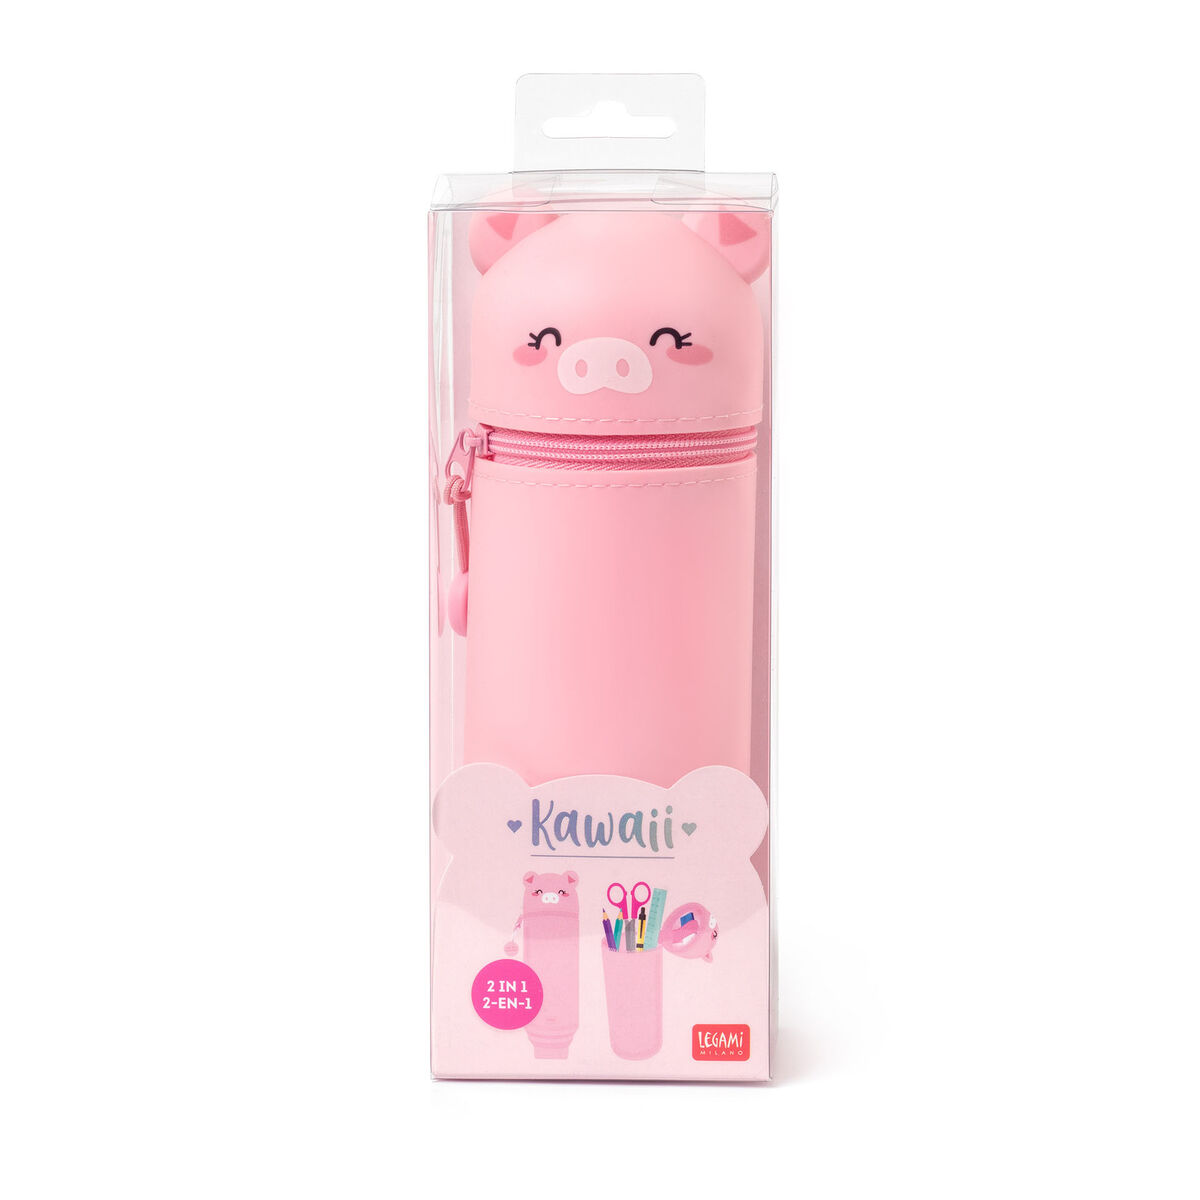 2 in 1 Soft Silicone Pencil Case - Kawaii PIG 